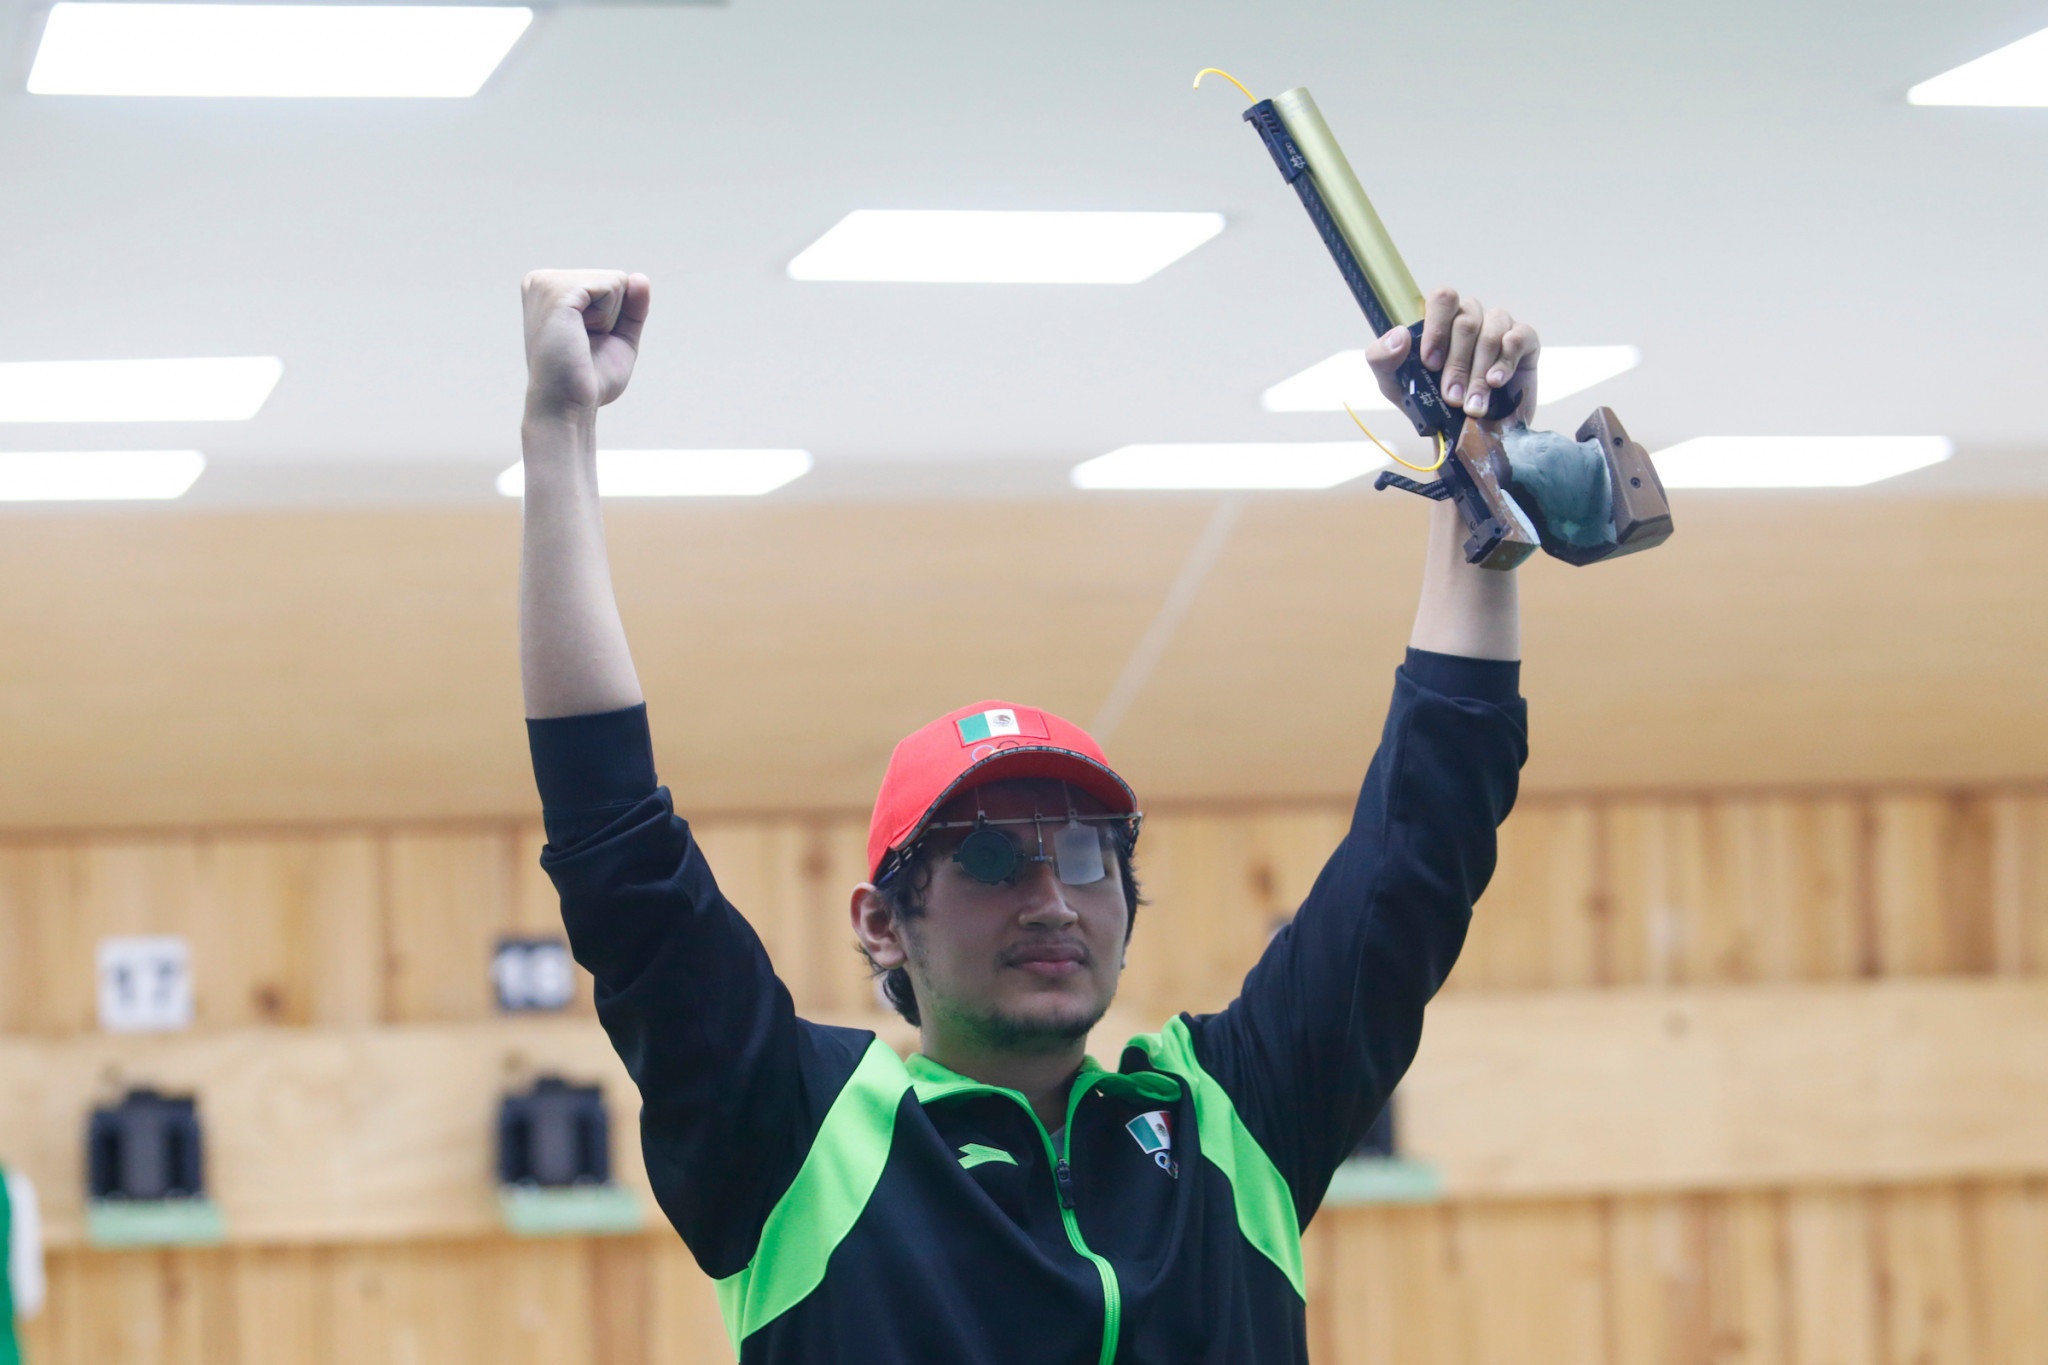 Ricardo Valencia secured another gold for Mexico, this time in the men's air pistol shooting event ©Agencia.Xpress Media